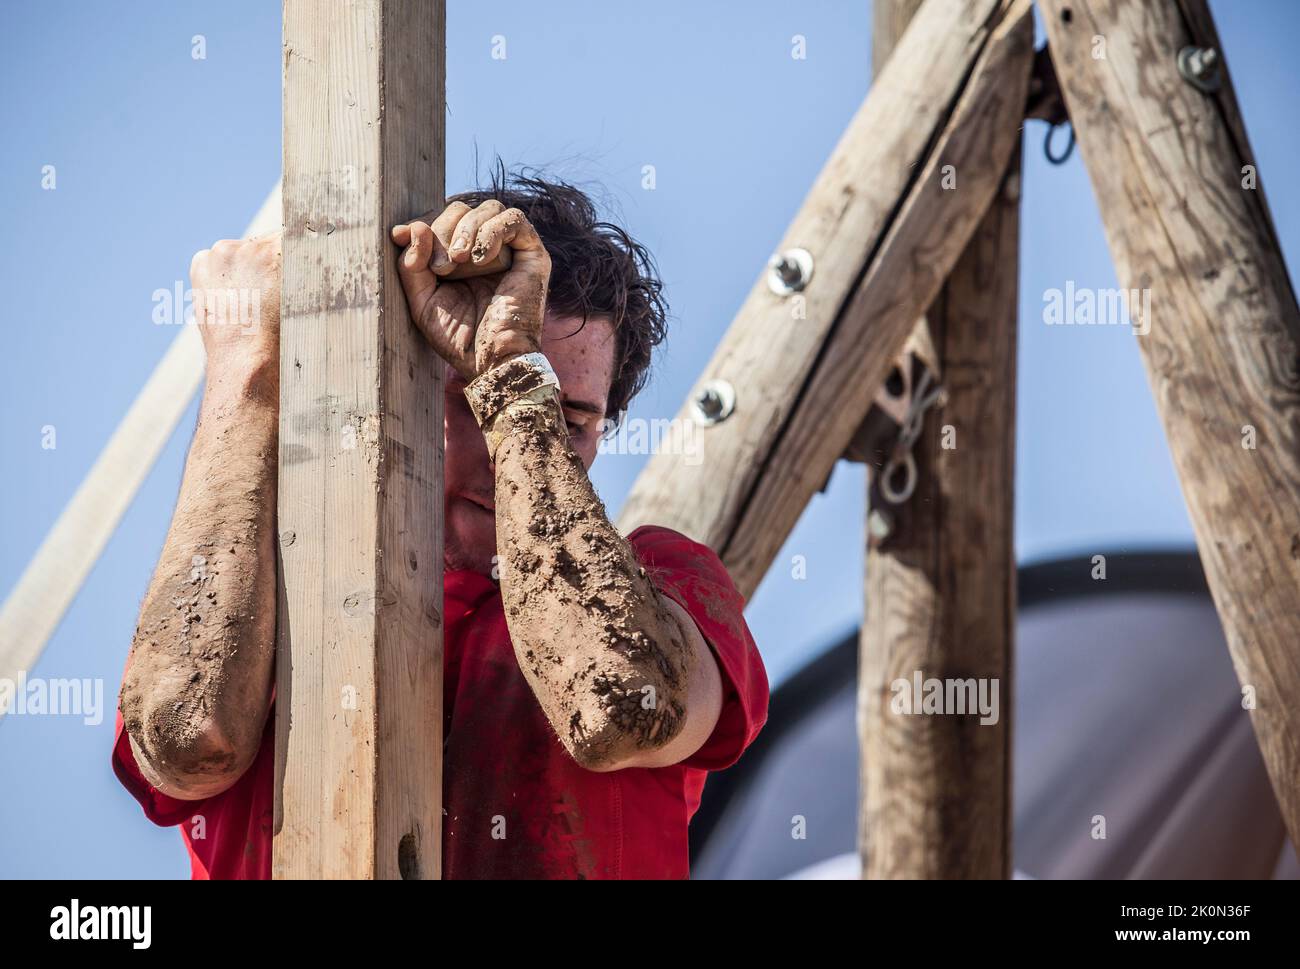 Merida, Spain - Sept 11th, 2022: FarinatoRace Merida 2022. Toughest obstacle course in the world. Climbing up a wooden beam with spikes Stock Photo